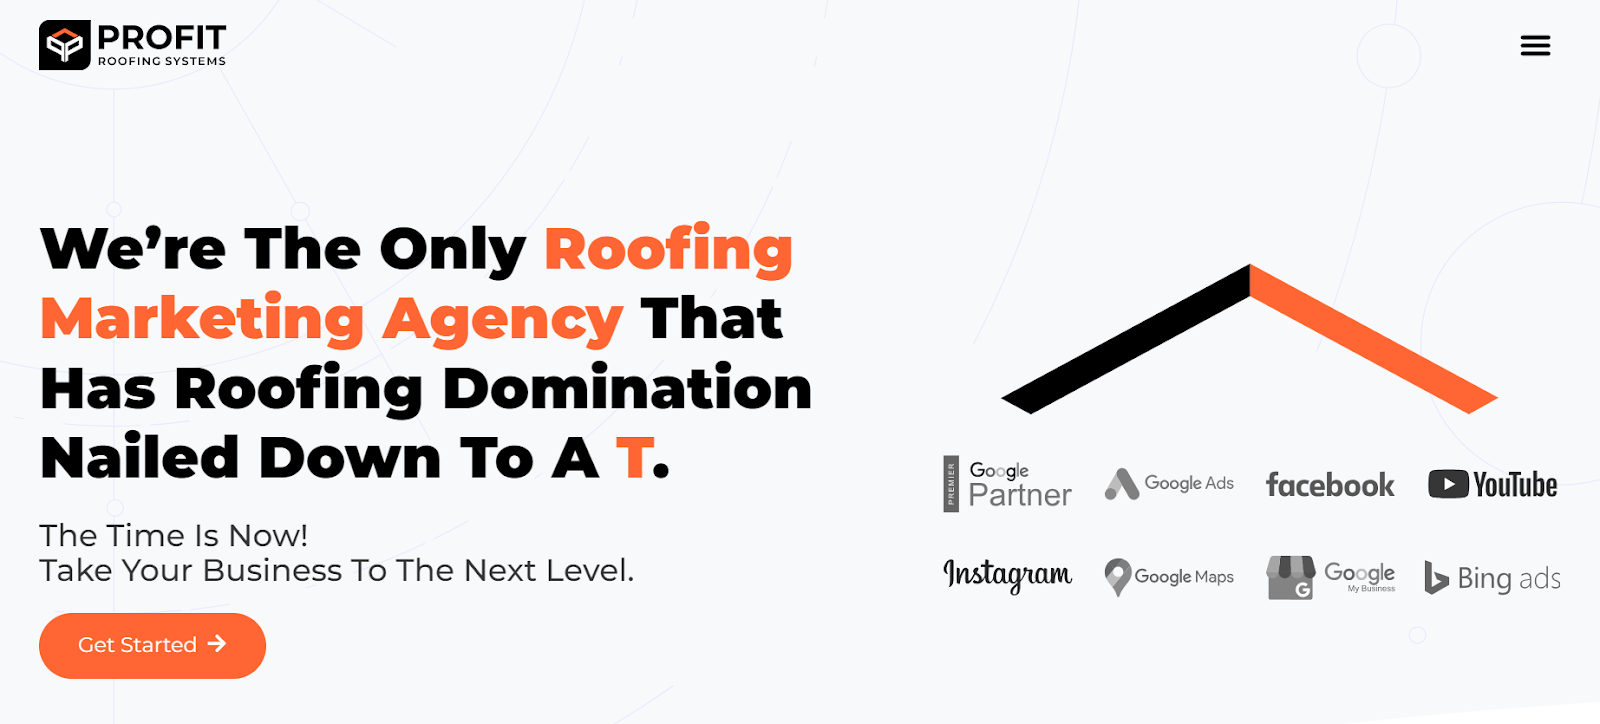 Profit Roofing System listed as one of the best SEO companies for Roofers